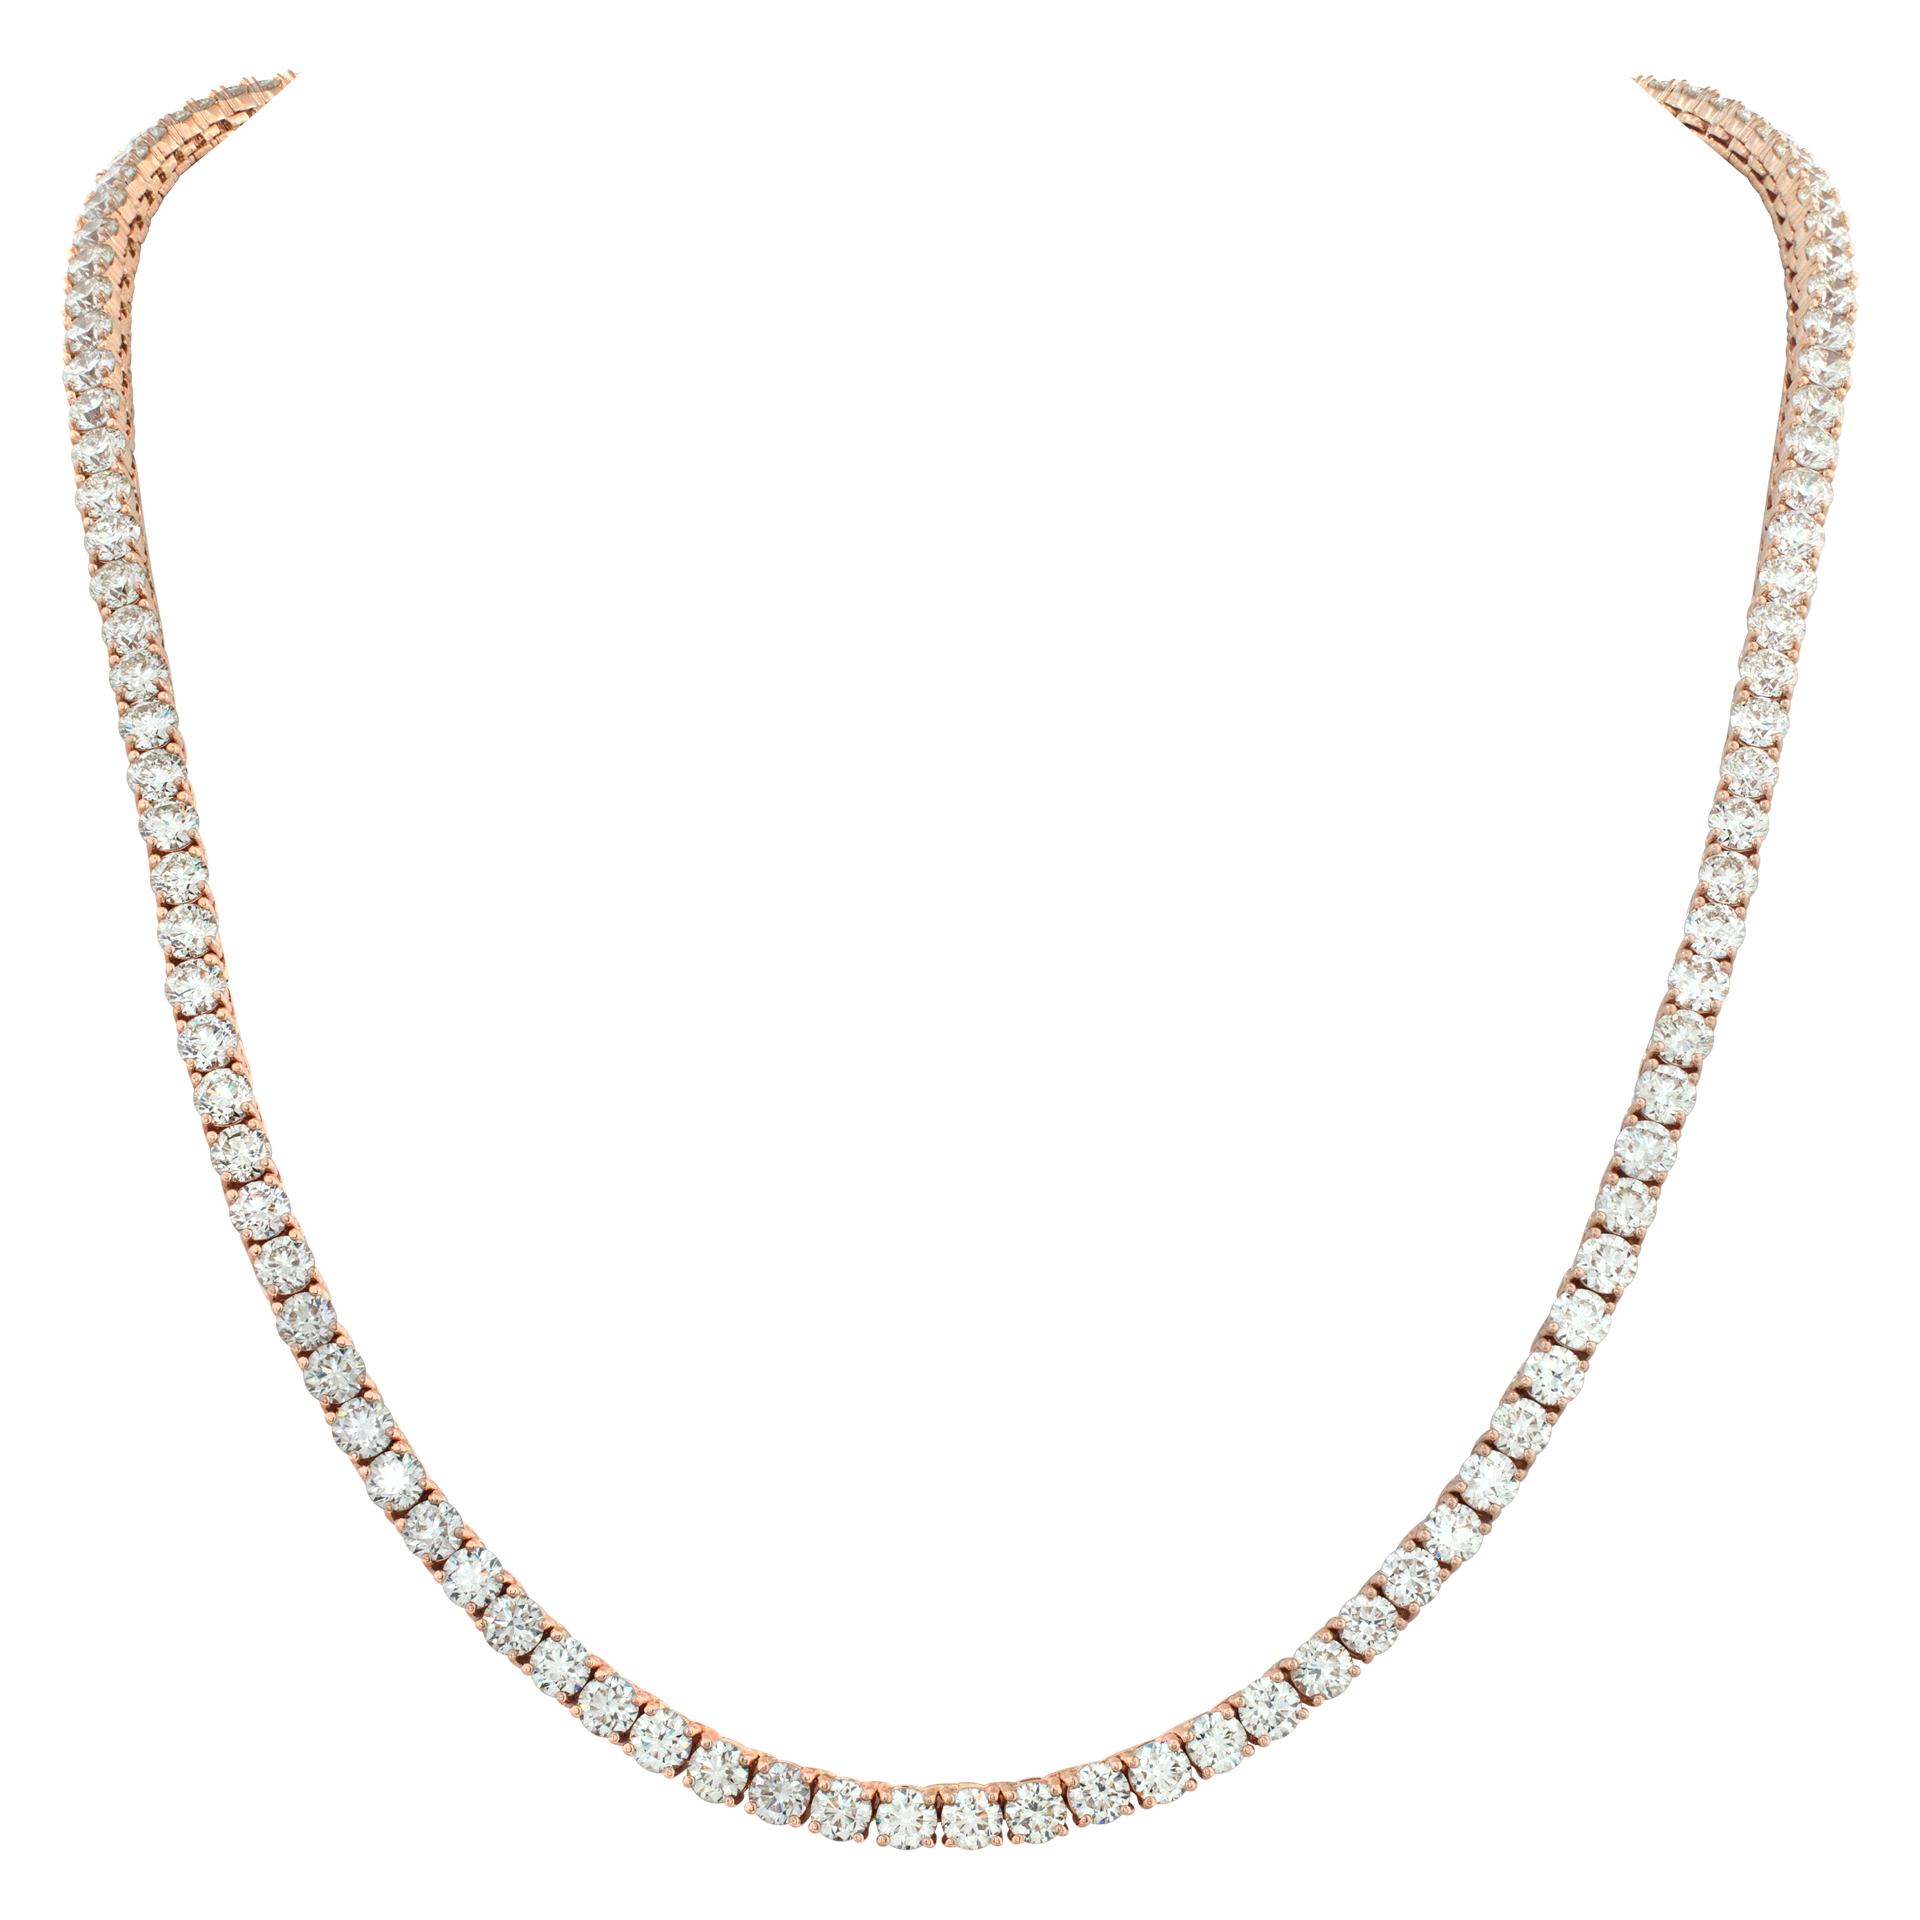 Diamond line necklace in 14k rose gold. Approx 46 carats in diamonds. (Stones)